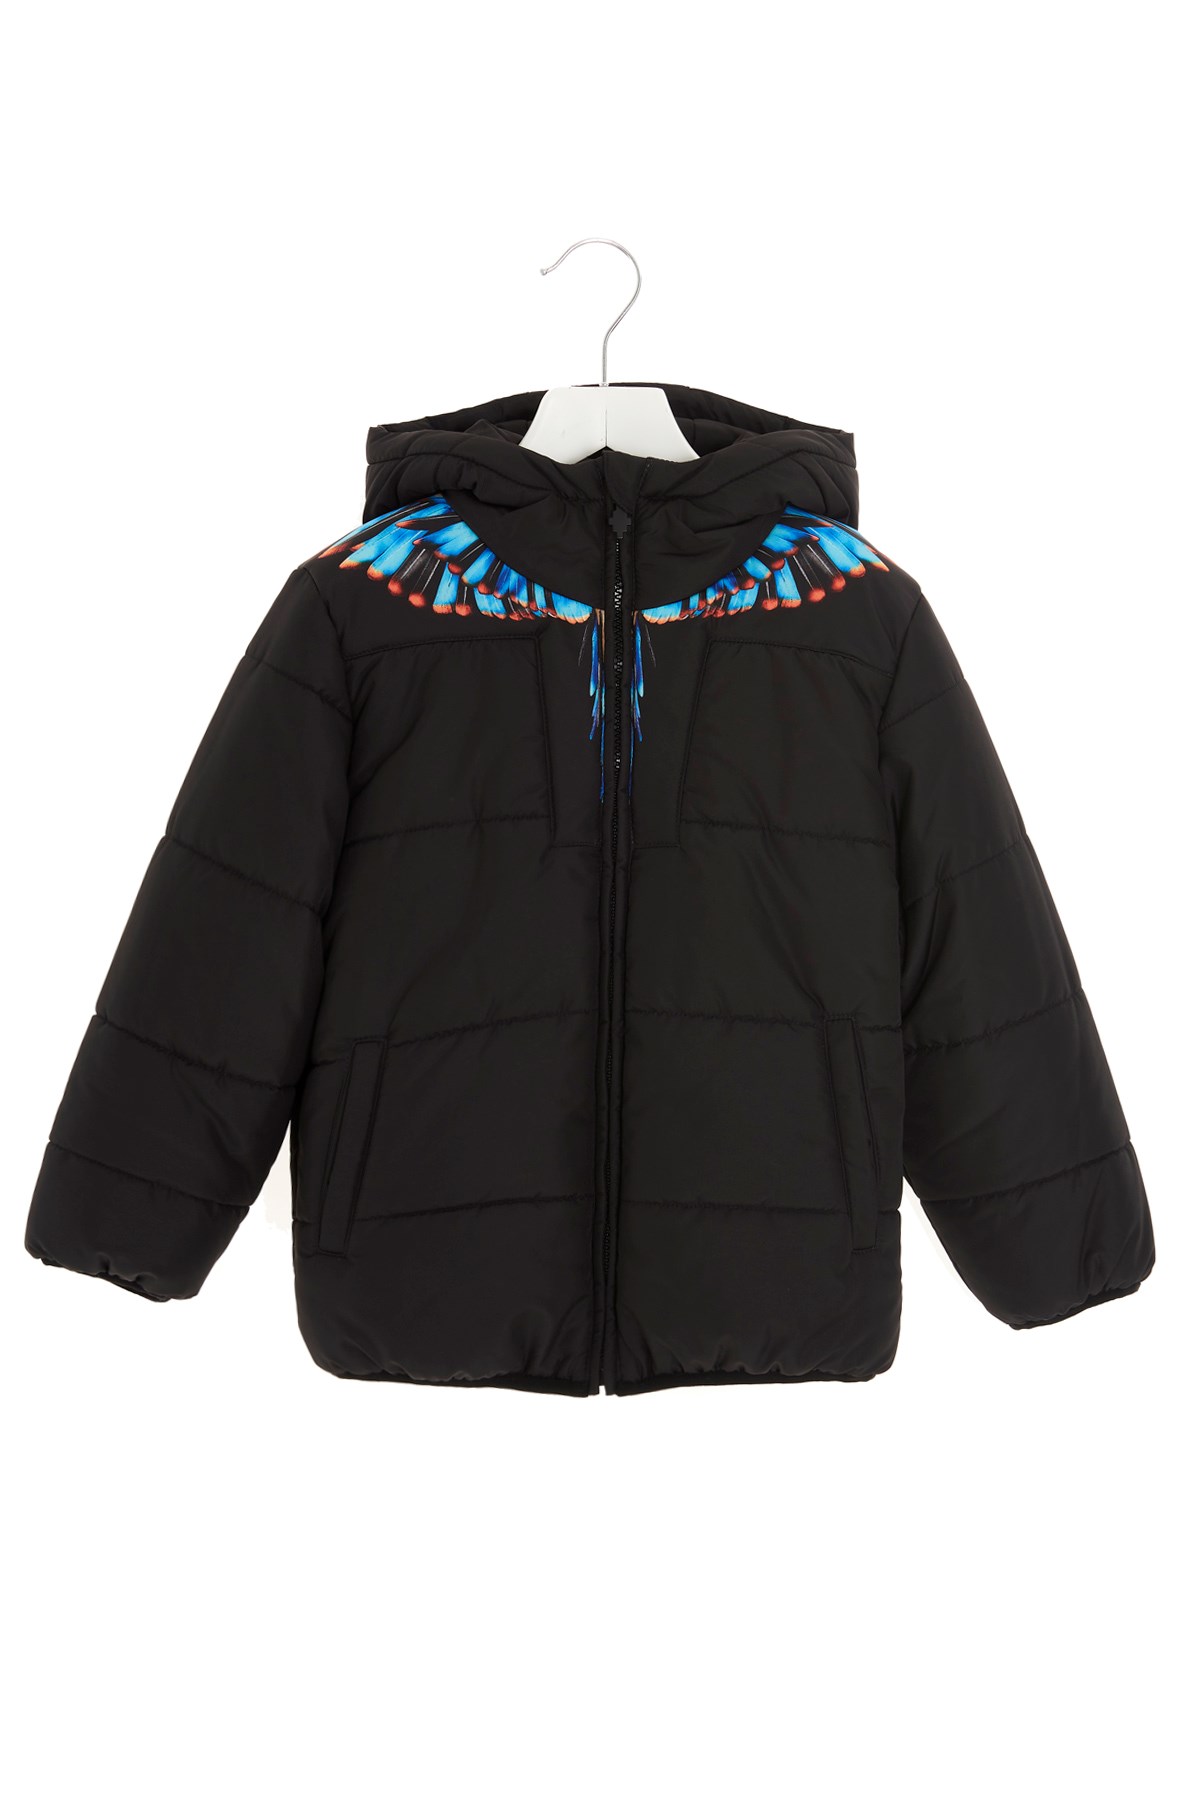 MARCELO BURLON - COUNTY OF MILAN 'Blue Grizzly Wings' Down Jacket